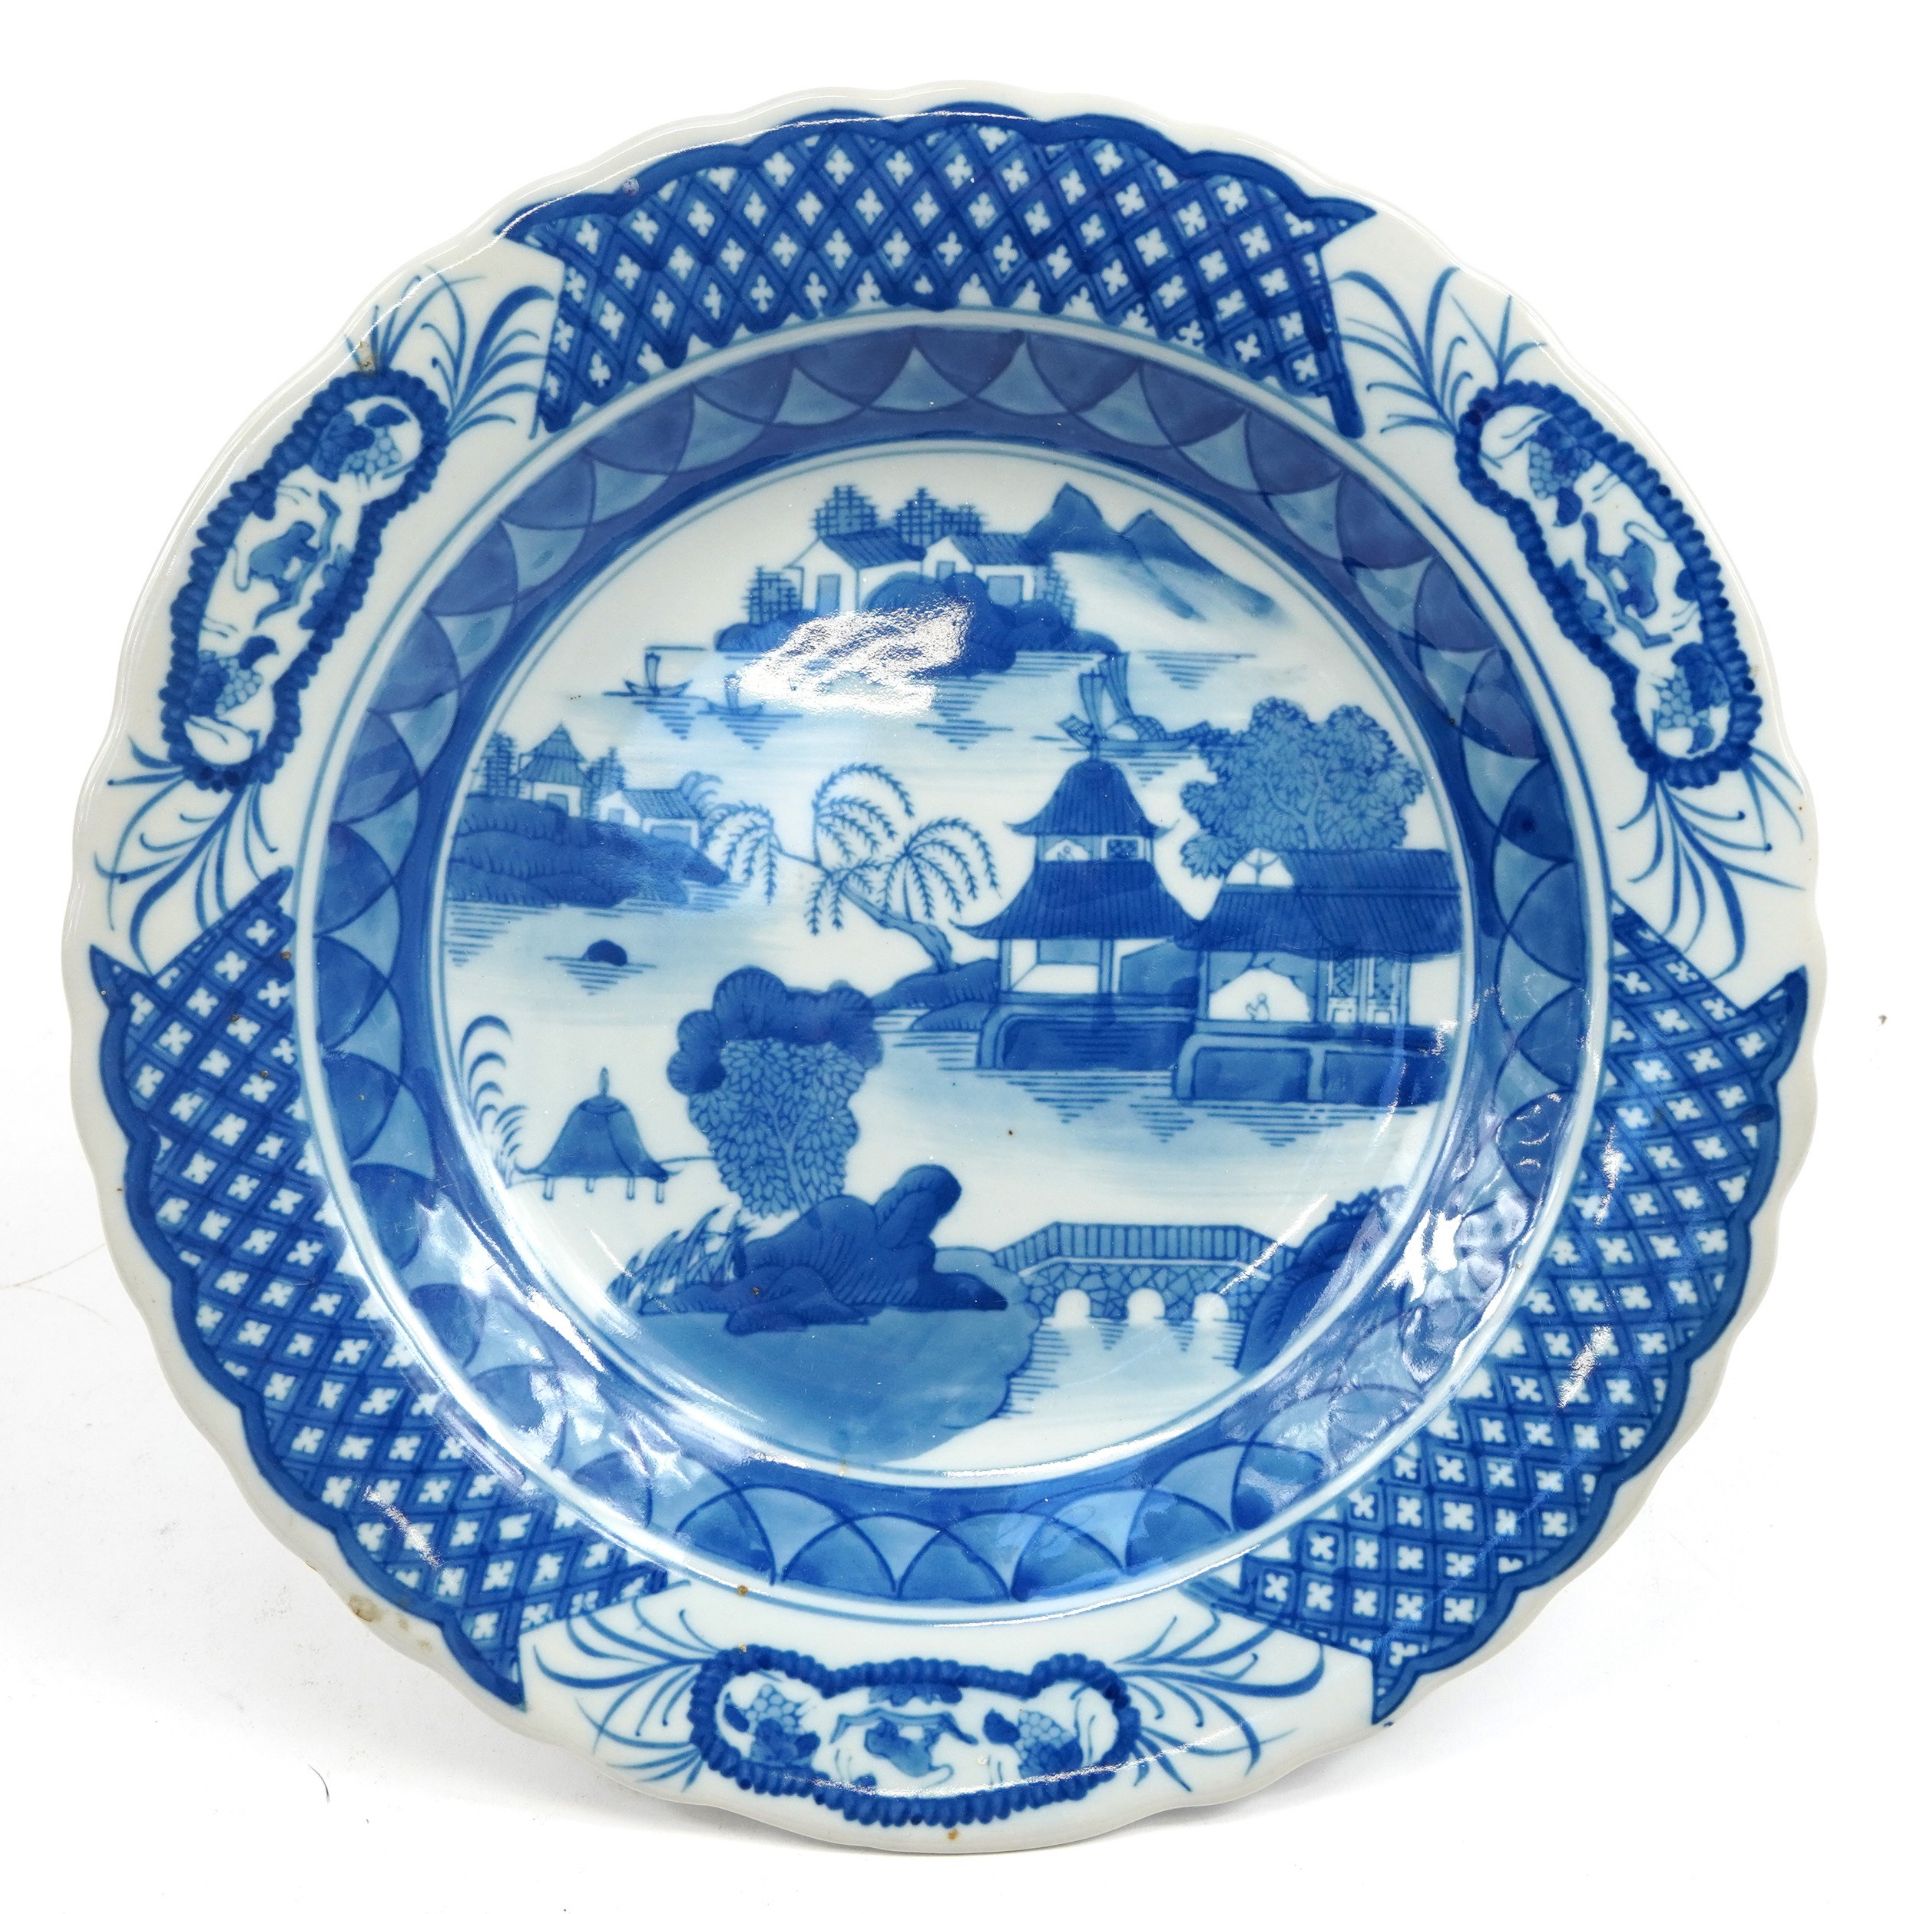 Chinese blue and white porcelain footed centre dish hand painted with a river landscape, character